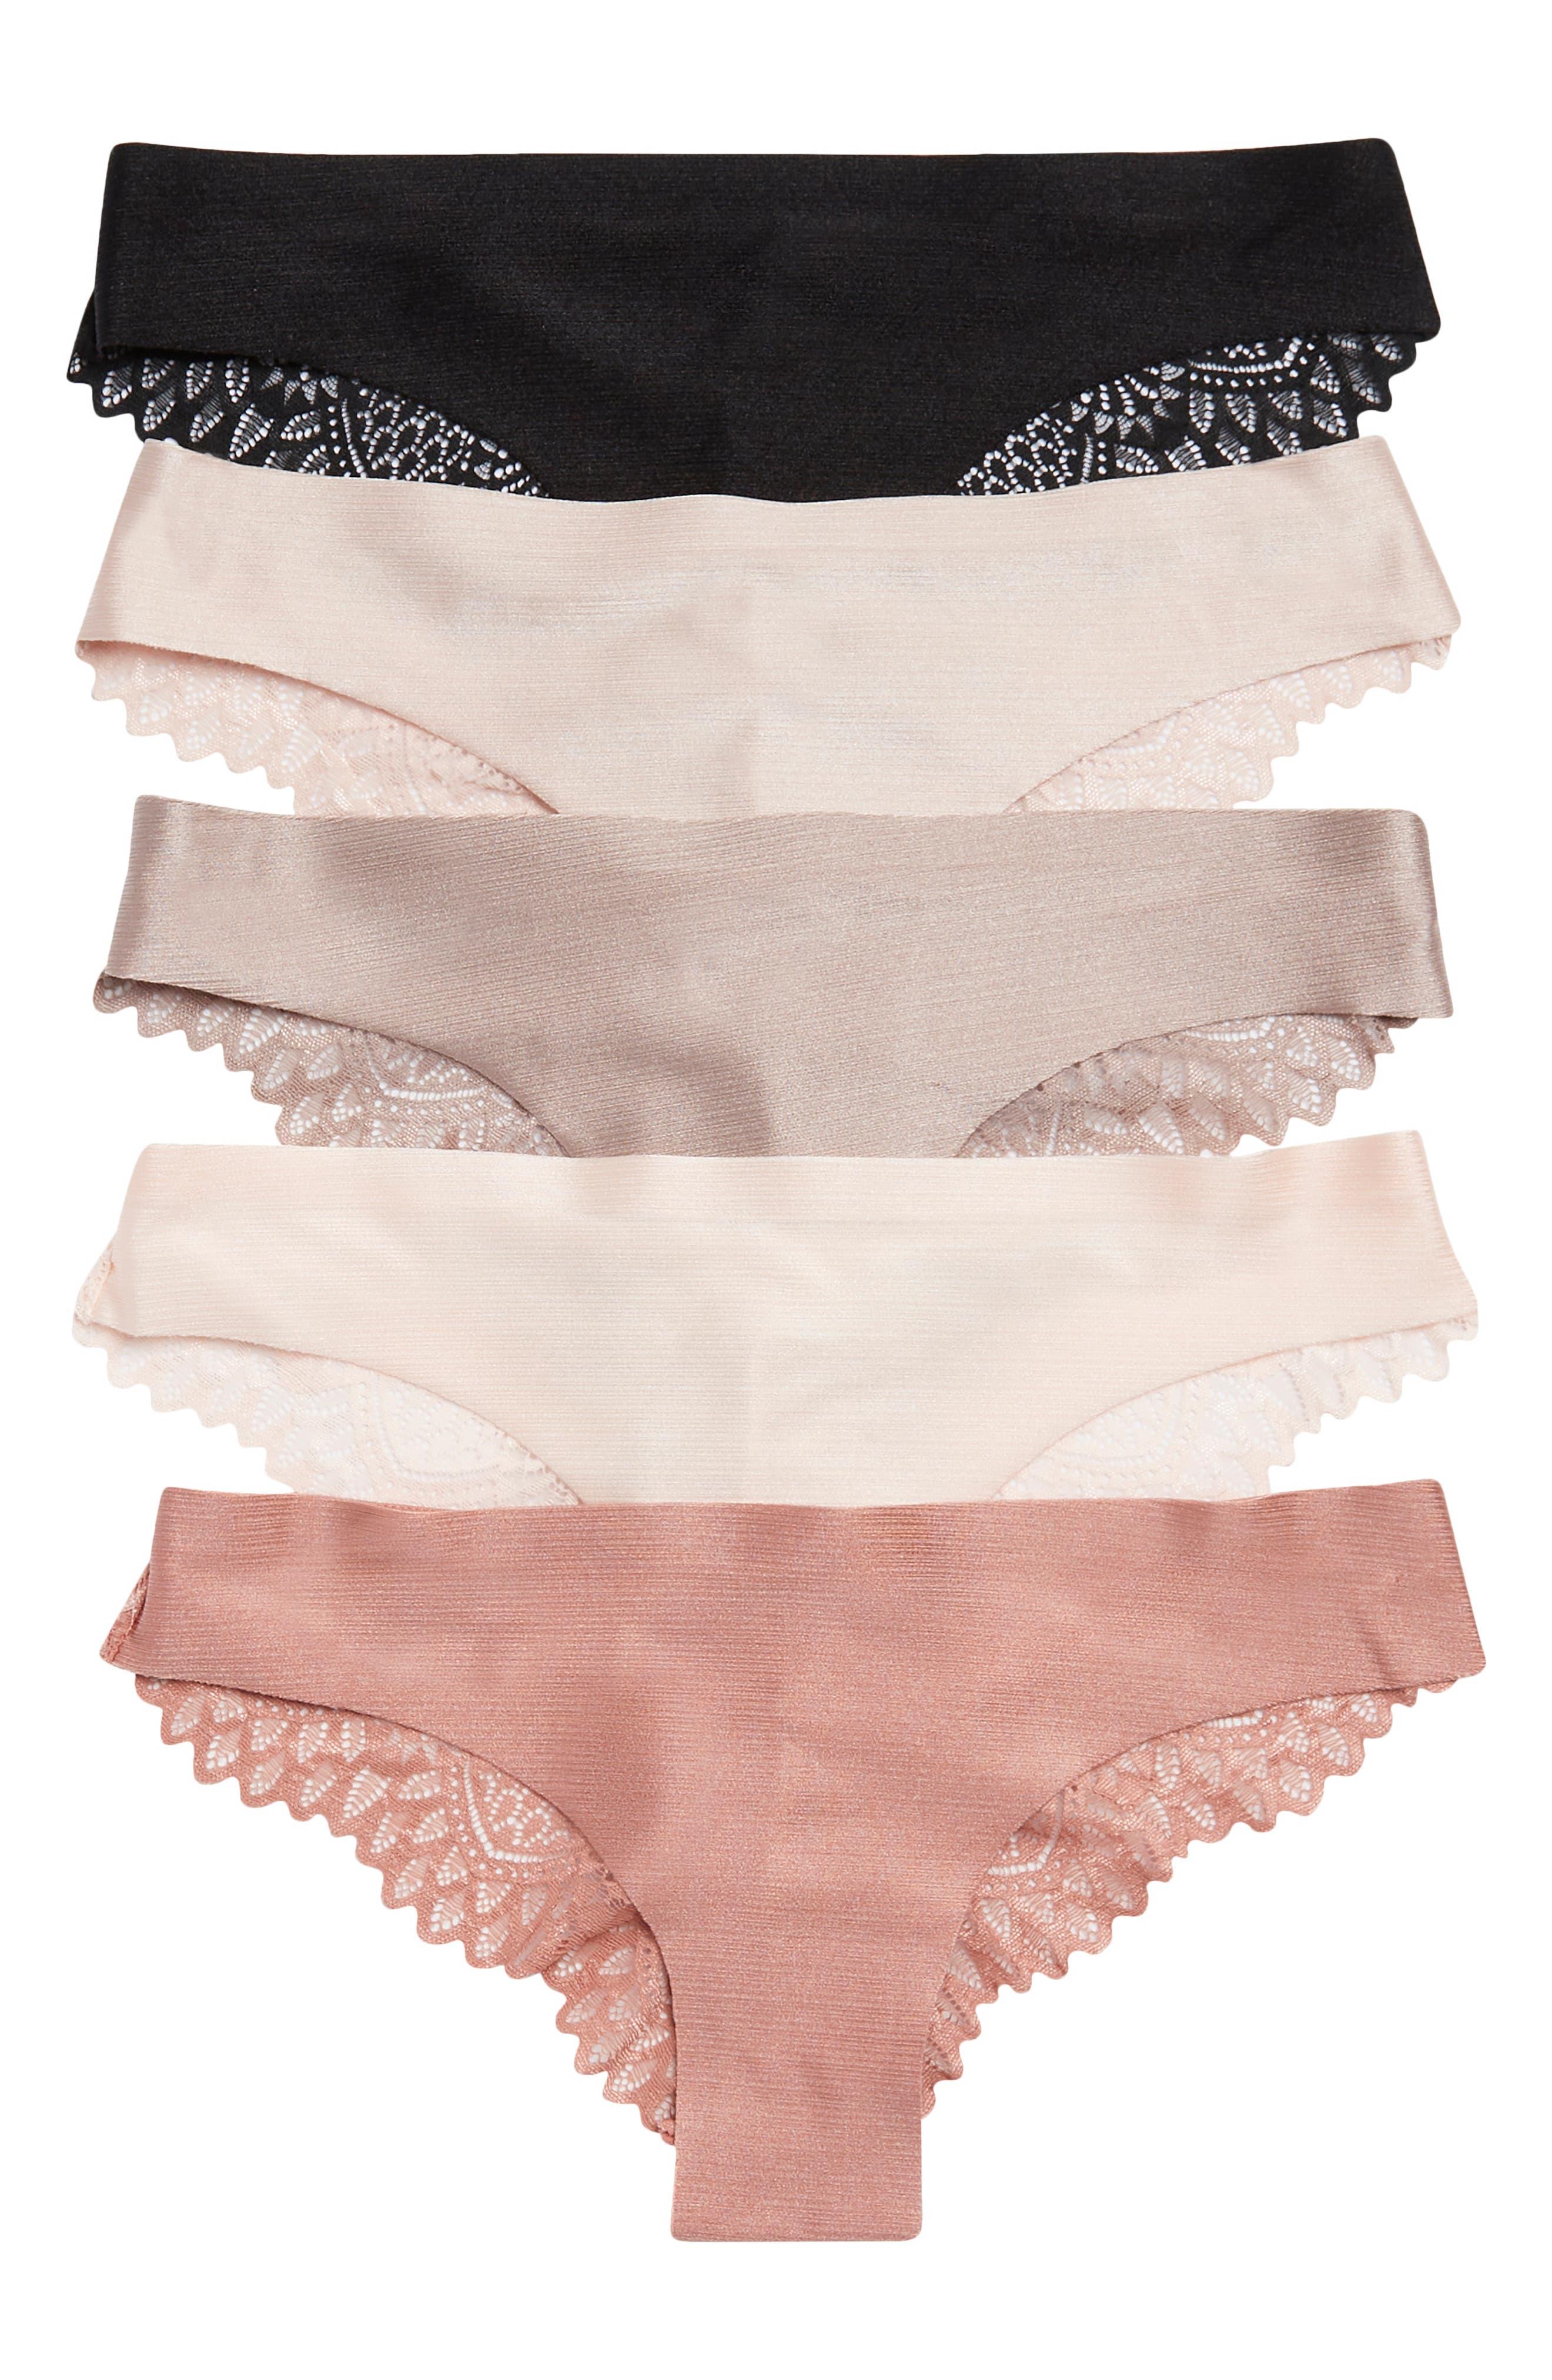 Adrienne Vittadini Assorted 5-pack Shine Micro Laser Lace Briefs in Pink